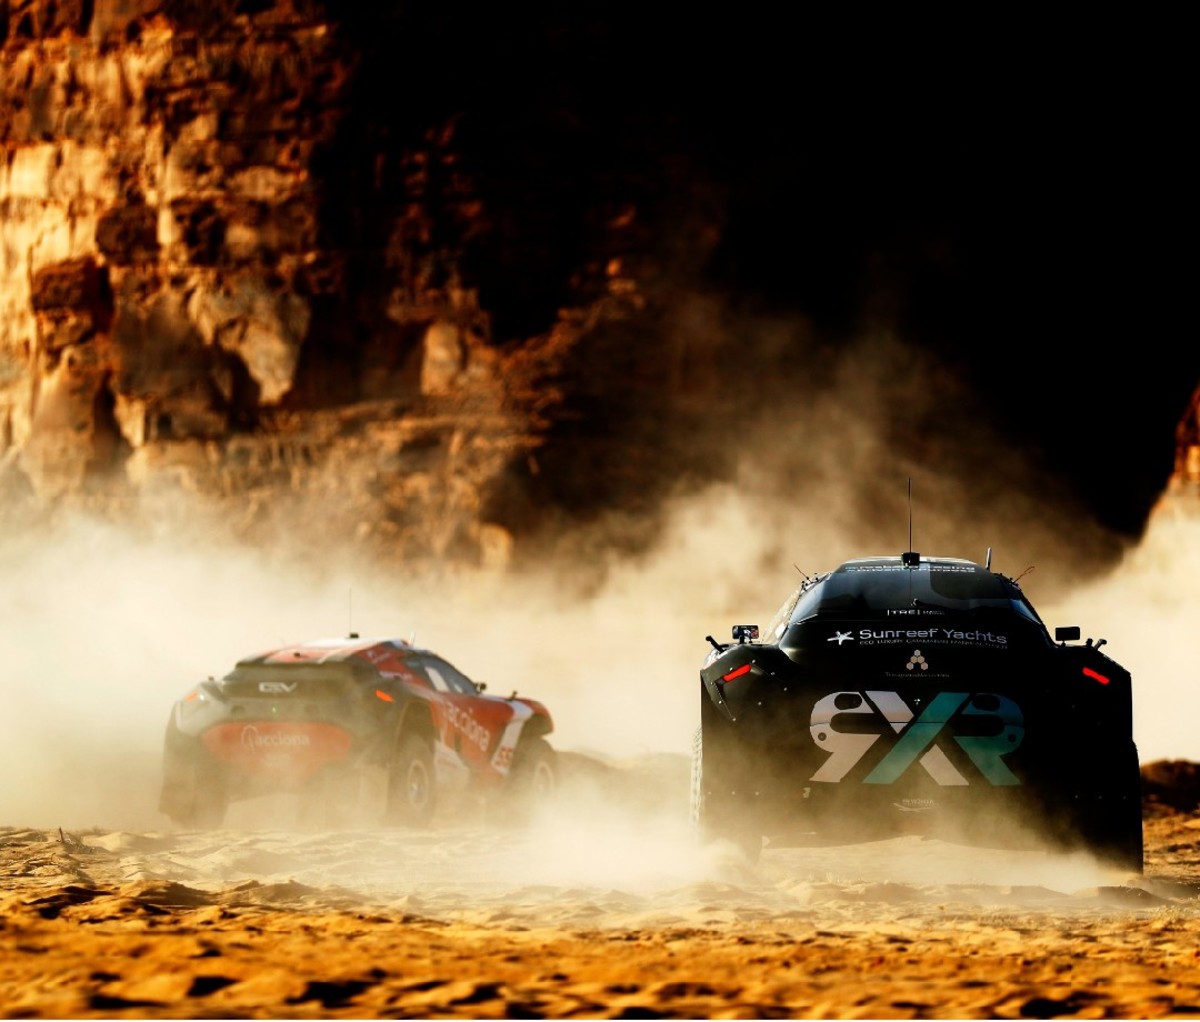 Extreme-E off-road SUVs racing in desert.